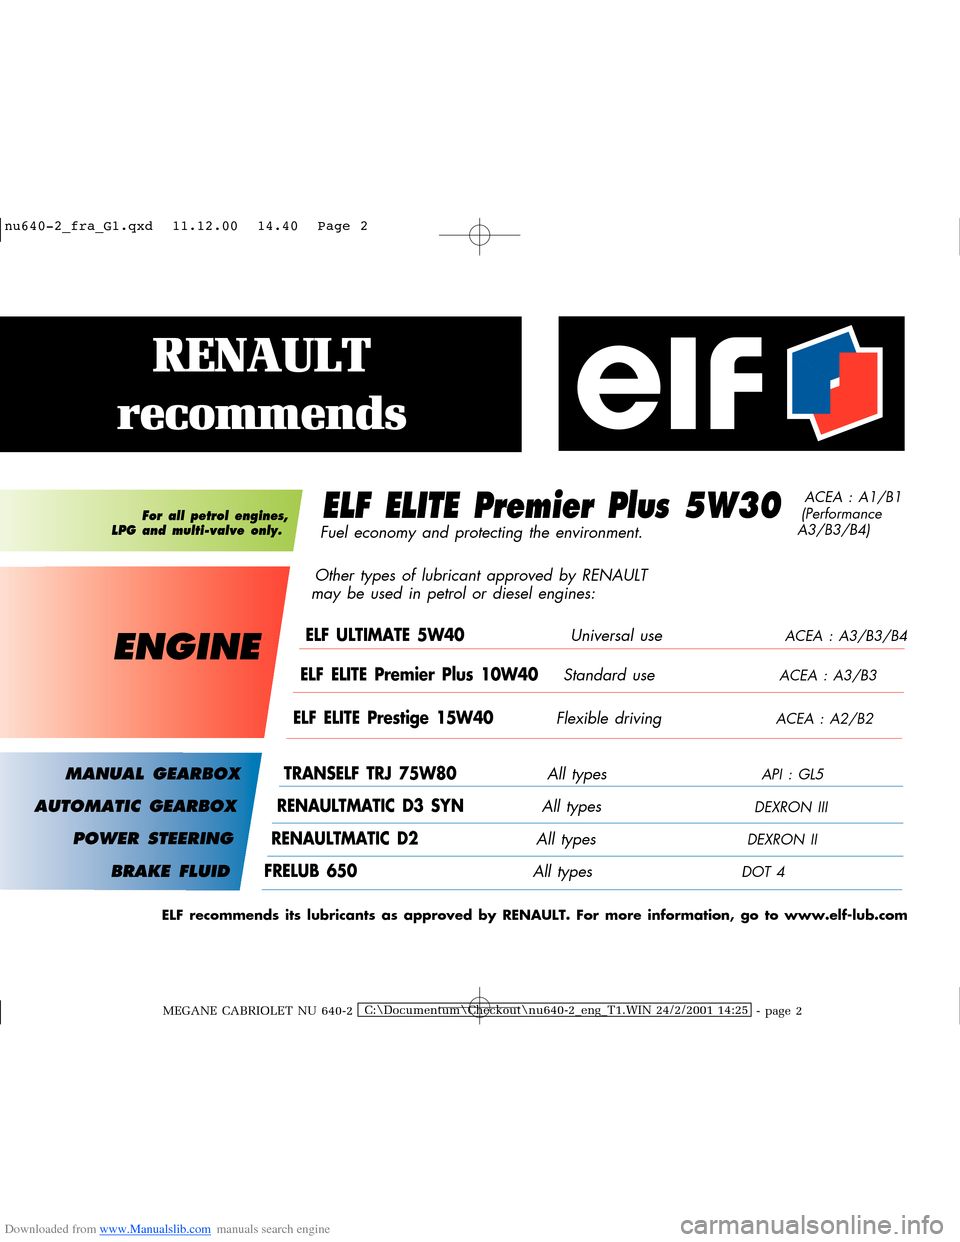 RENAULT MEGANE 2000 X64 / 1.G Owners Manual Downloaded from www.Manualslib.com manuals search engine �Q�X������B�I�U�D�B�*���T�[�G� � ��������� � ������ � �3�D�J�H� �
MEGANE CABRIOLET NU 640-2C:\Documentum\Checkout
u